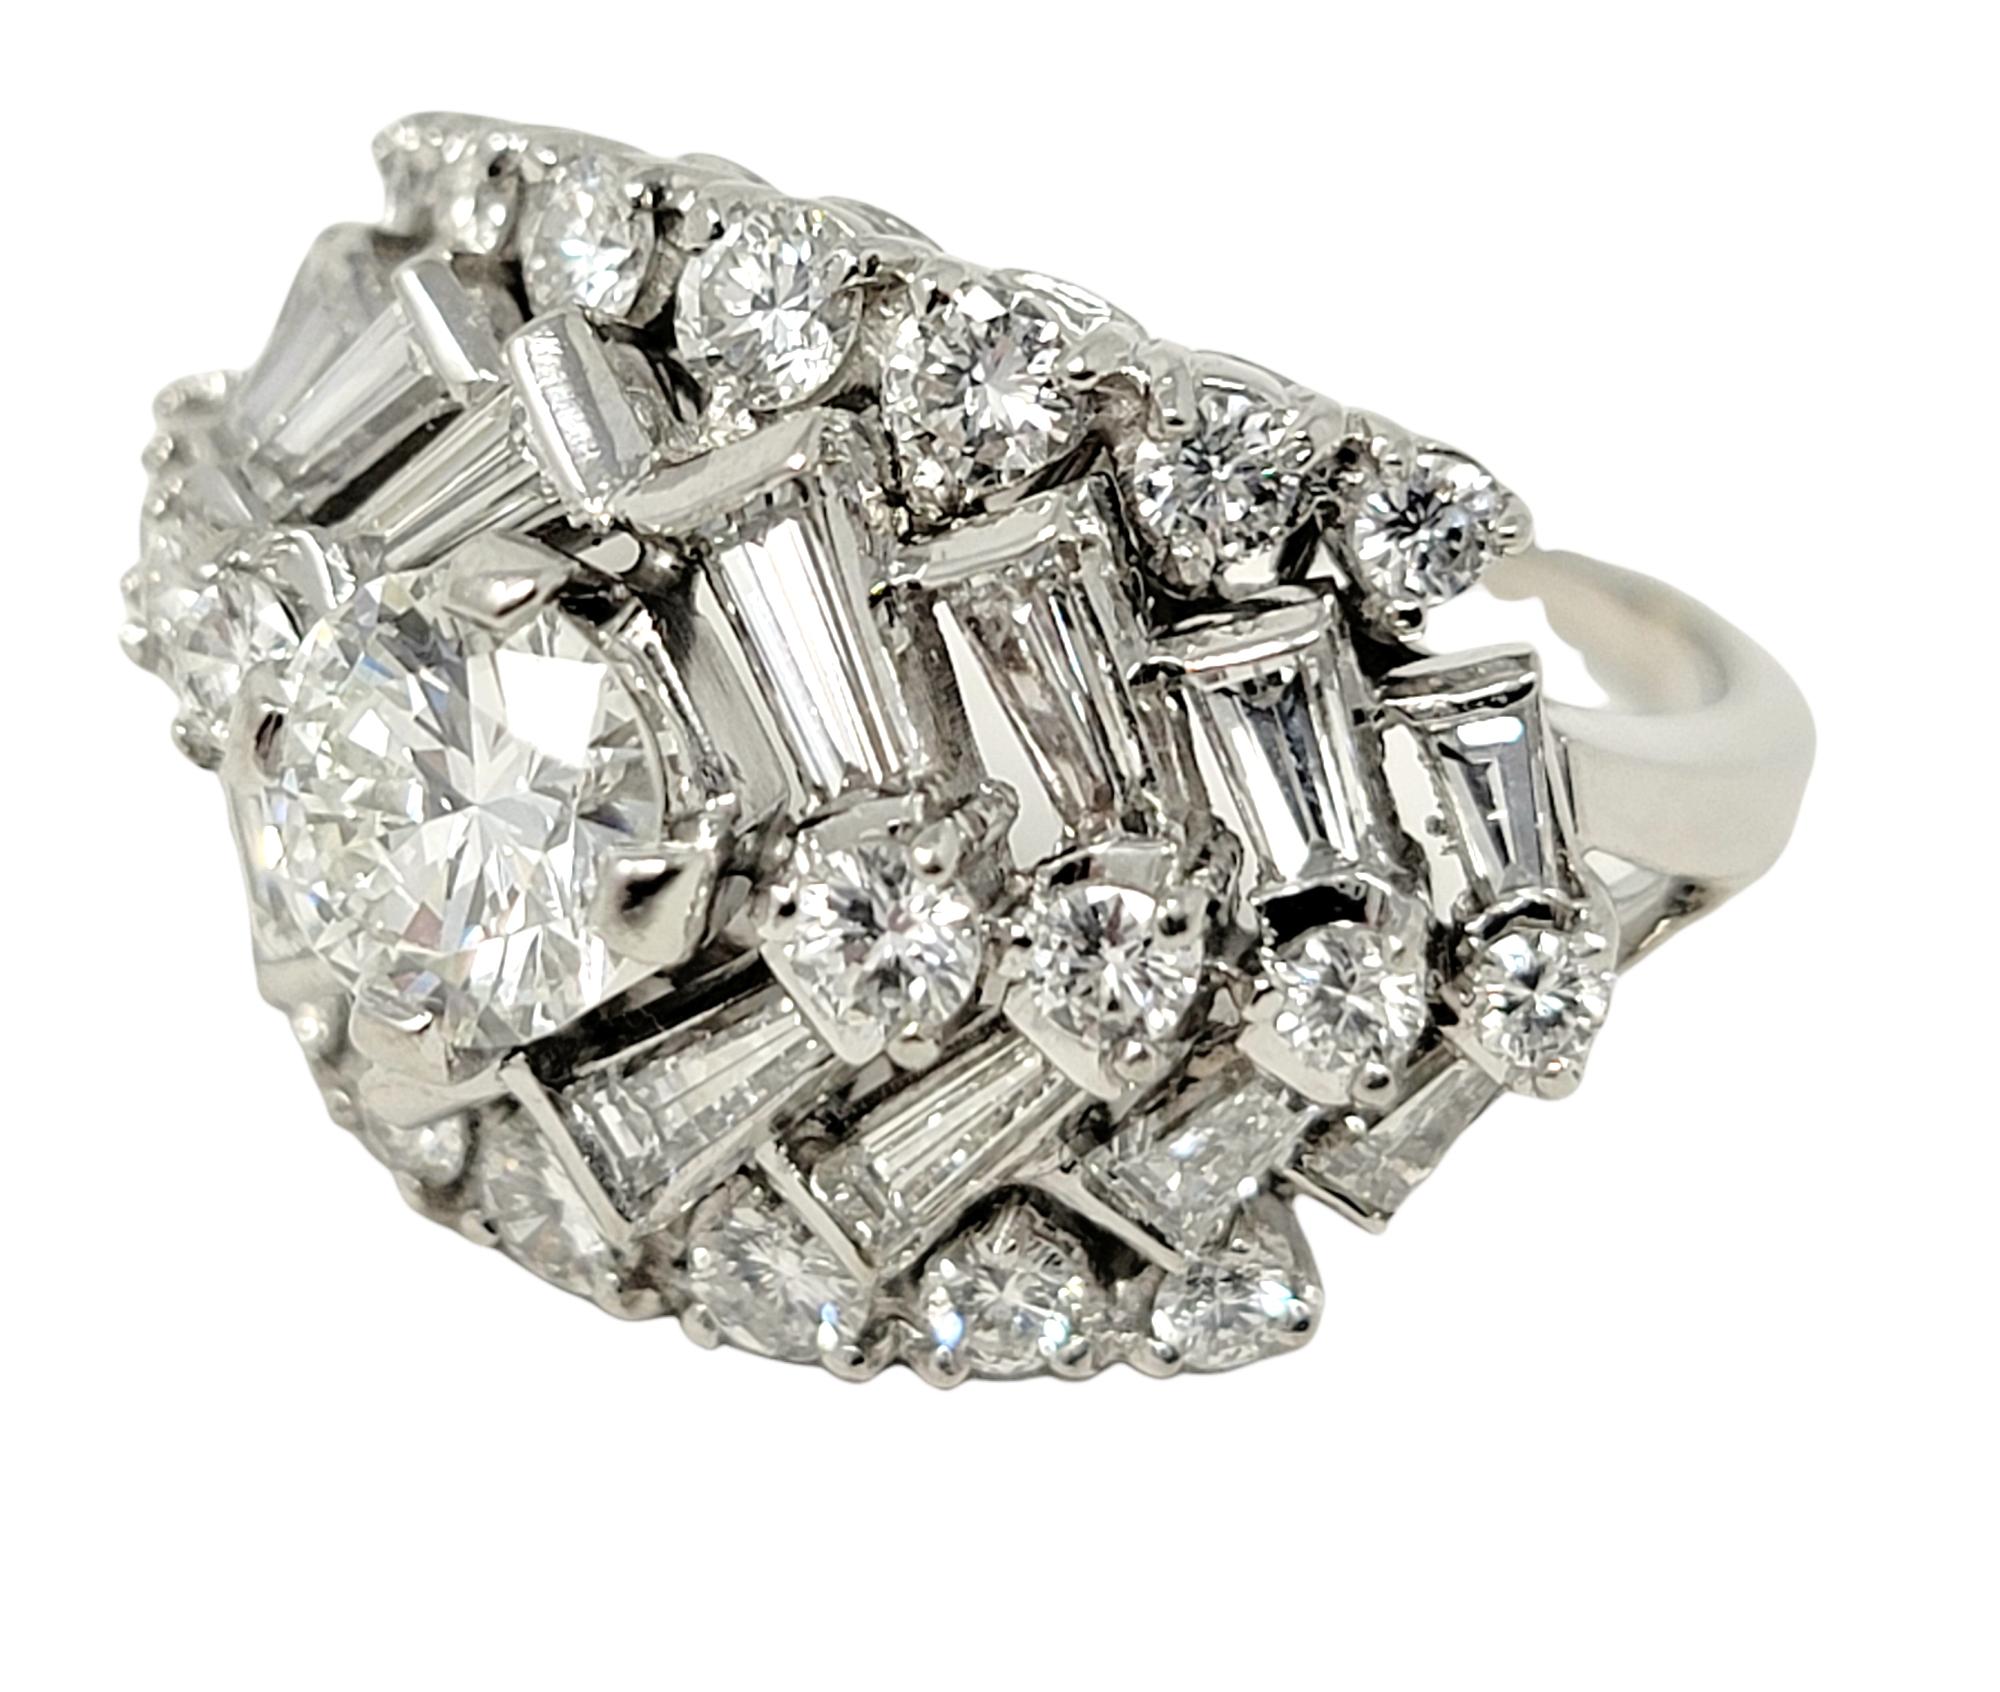 Ring size: 7

This stunningly sparkly chevron patterned diamond band ring will absolutely take your breath away. An incredible, ice white round brilliant .75 carat center stone is surrounded by a series of stacked baguette and round diamonds,